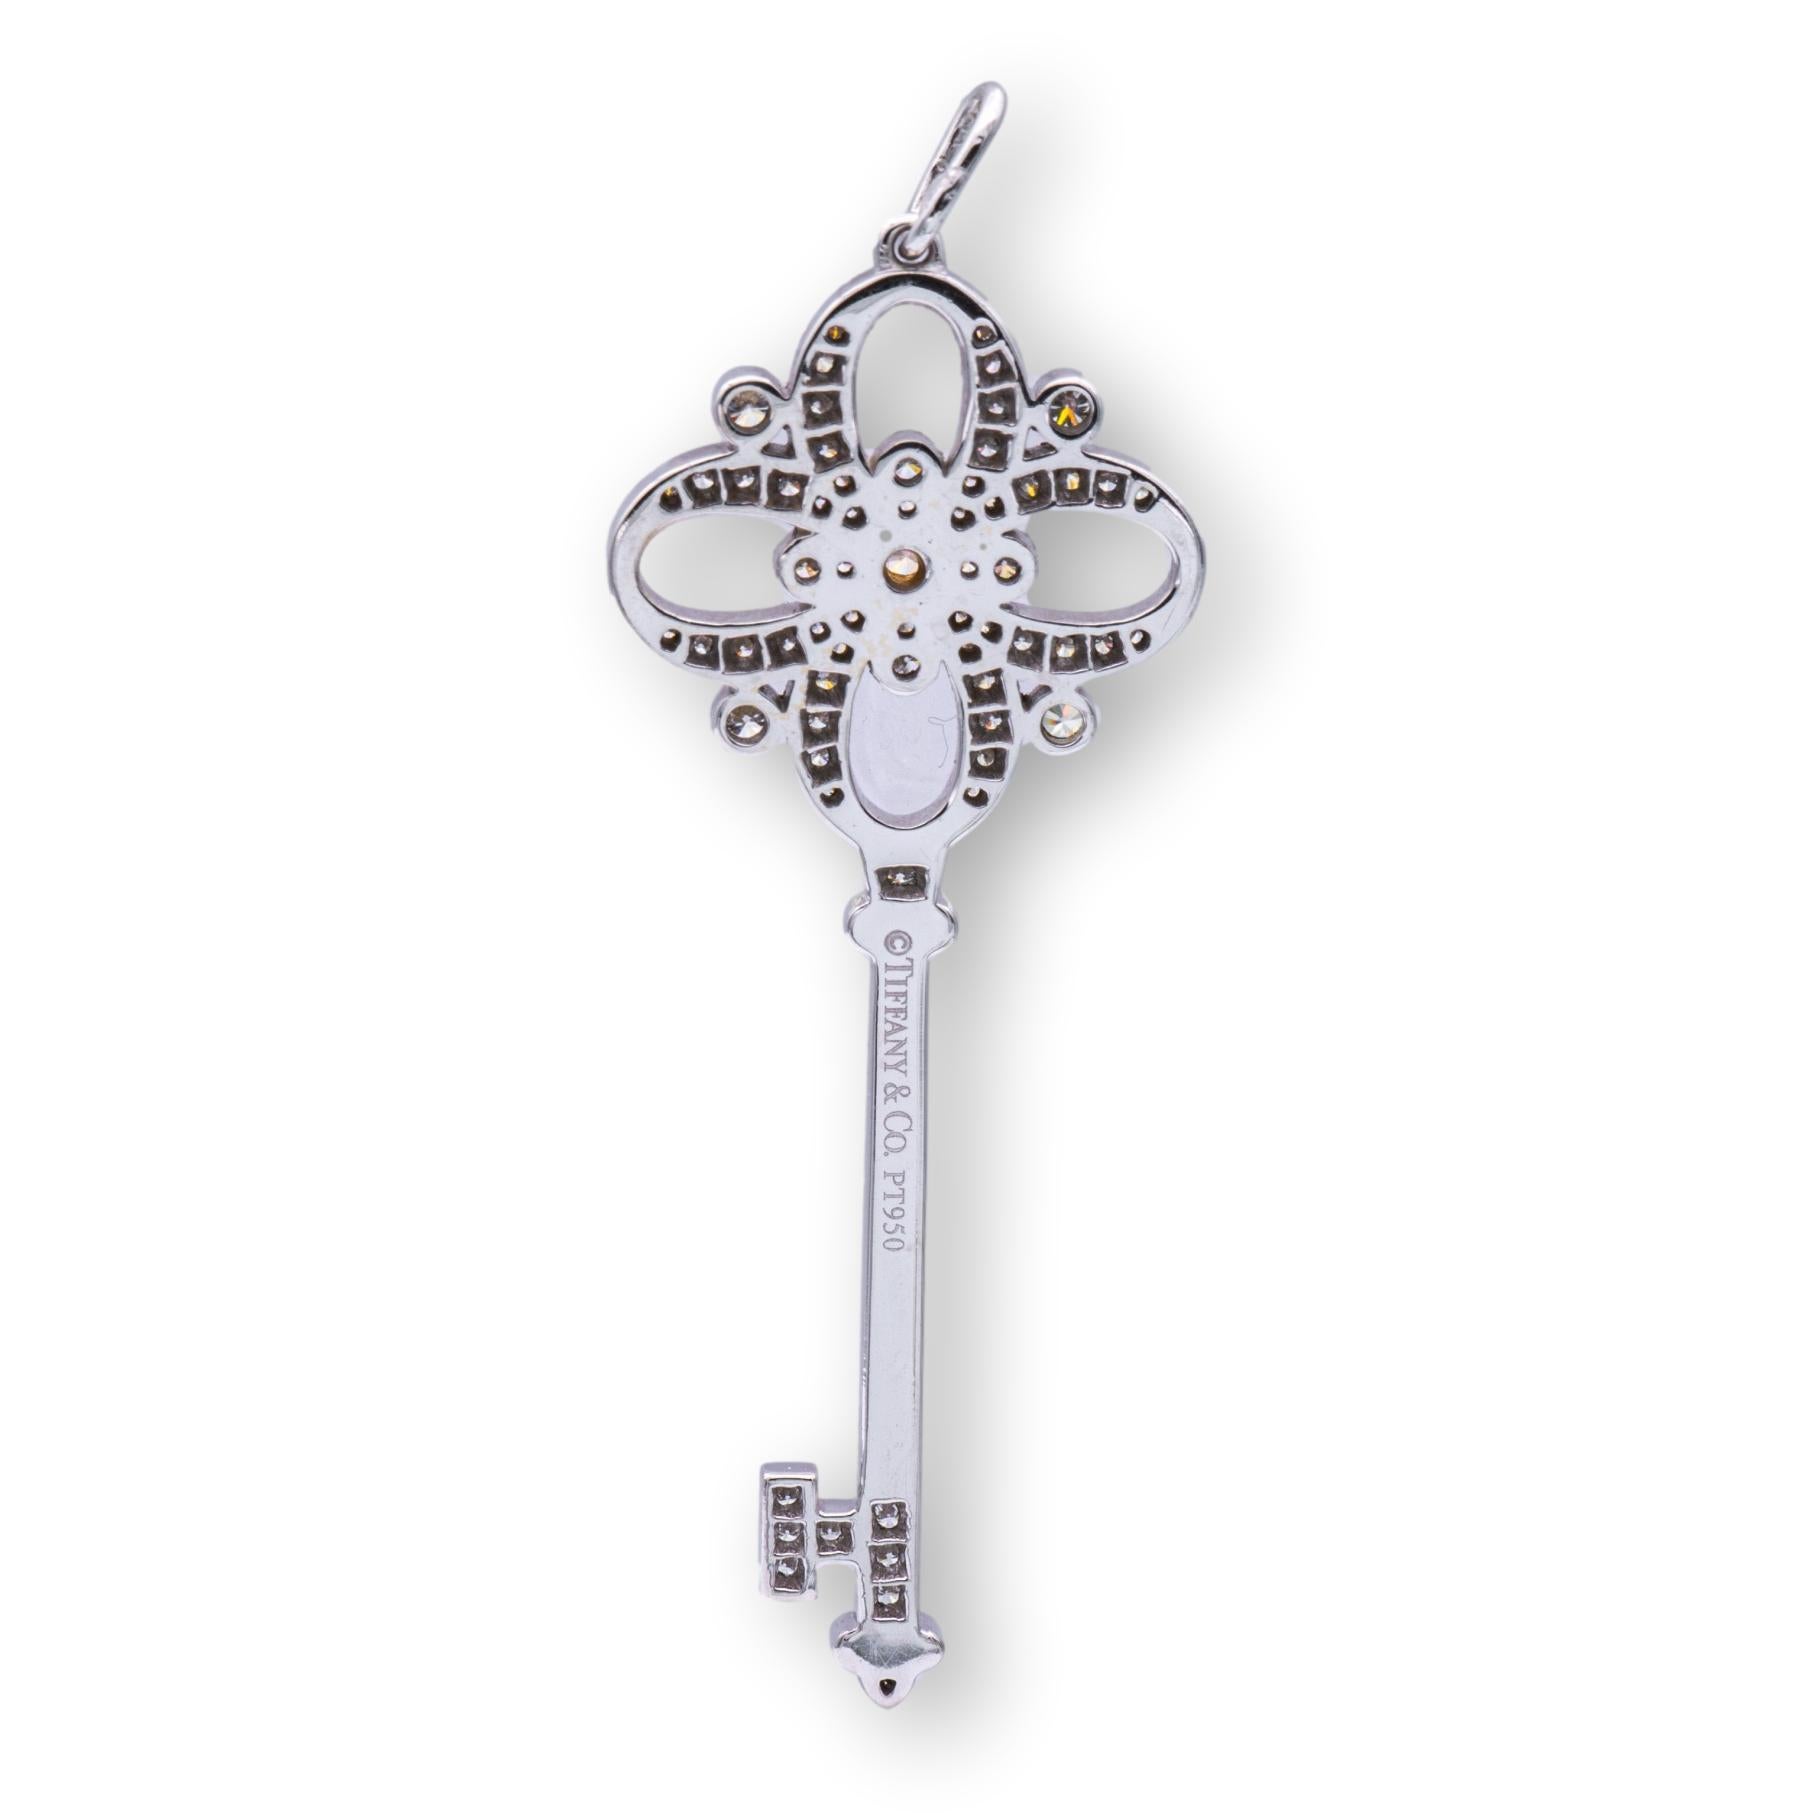 Tiffany & Co. Key pendant from the floret collection finely crafted in platinum featuring a center round brilliant Fancy Intense pink diamond weighing 0.05. cts set inside a bezel complemented by white round brilliant cut diamonds weighing 0.44